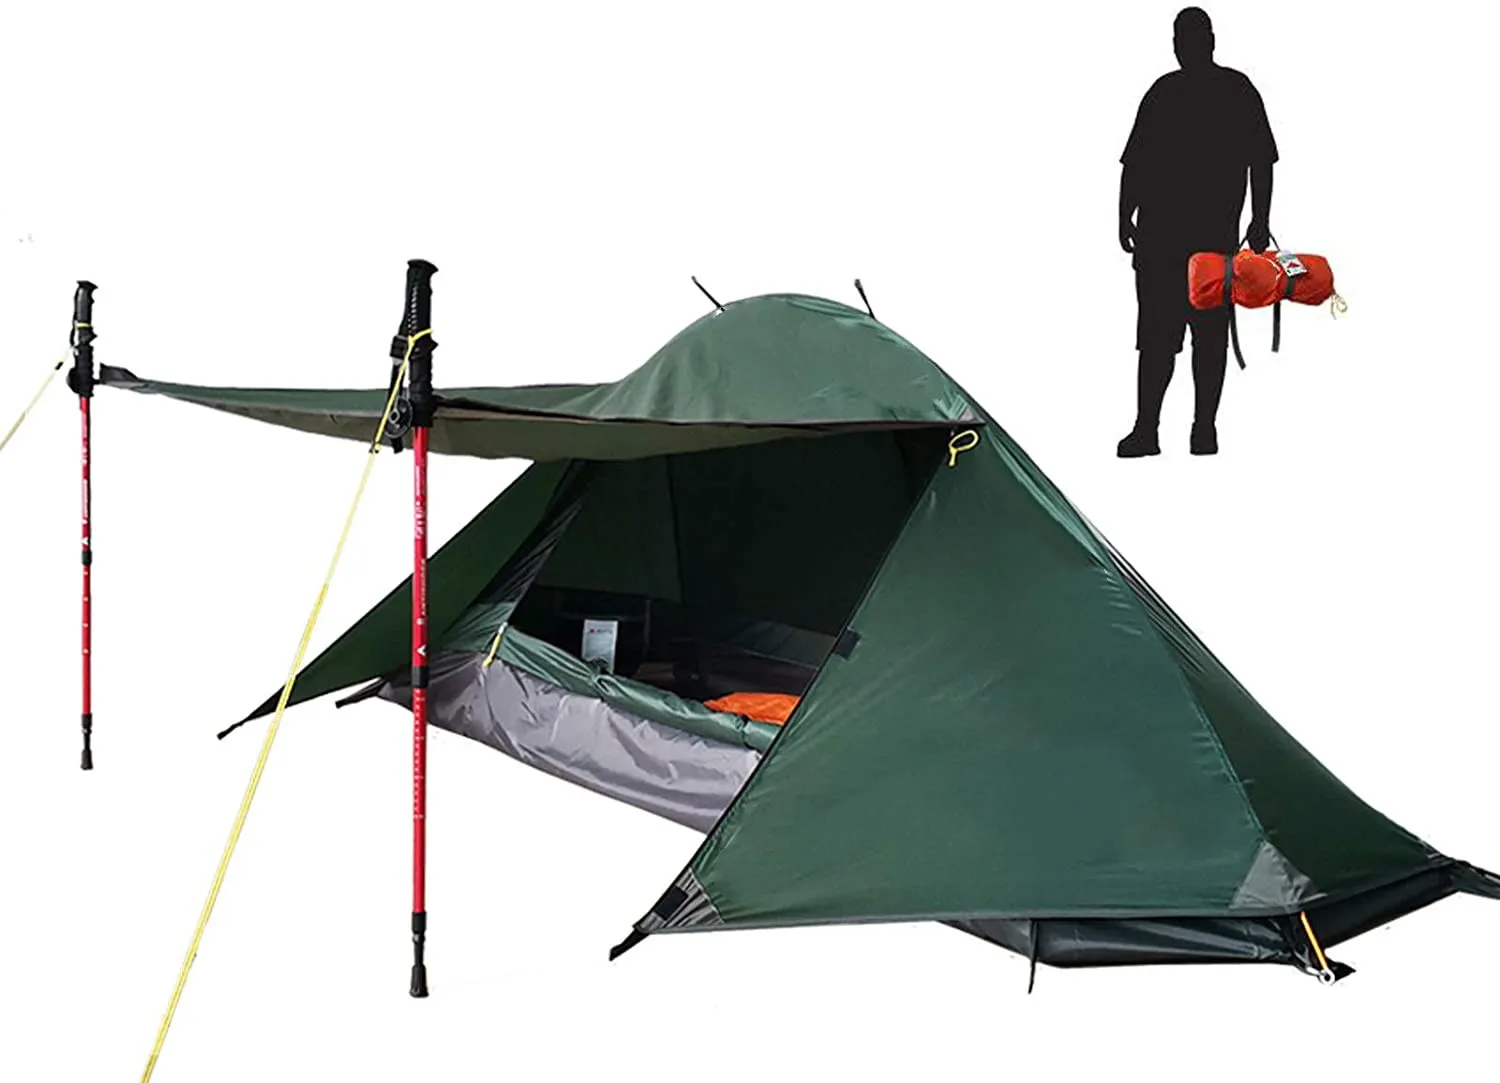 verpleegster rol Ster 1 Person Camping Tent For Camping Windproof Rainproof Waterproof Hiking  Mountain Hunting 4 Season Backpack Tent - Buy Backpack Tent,1 Person  Camping Tent,Waterproof Camping Tent Product on Alibaba.com